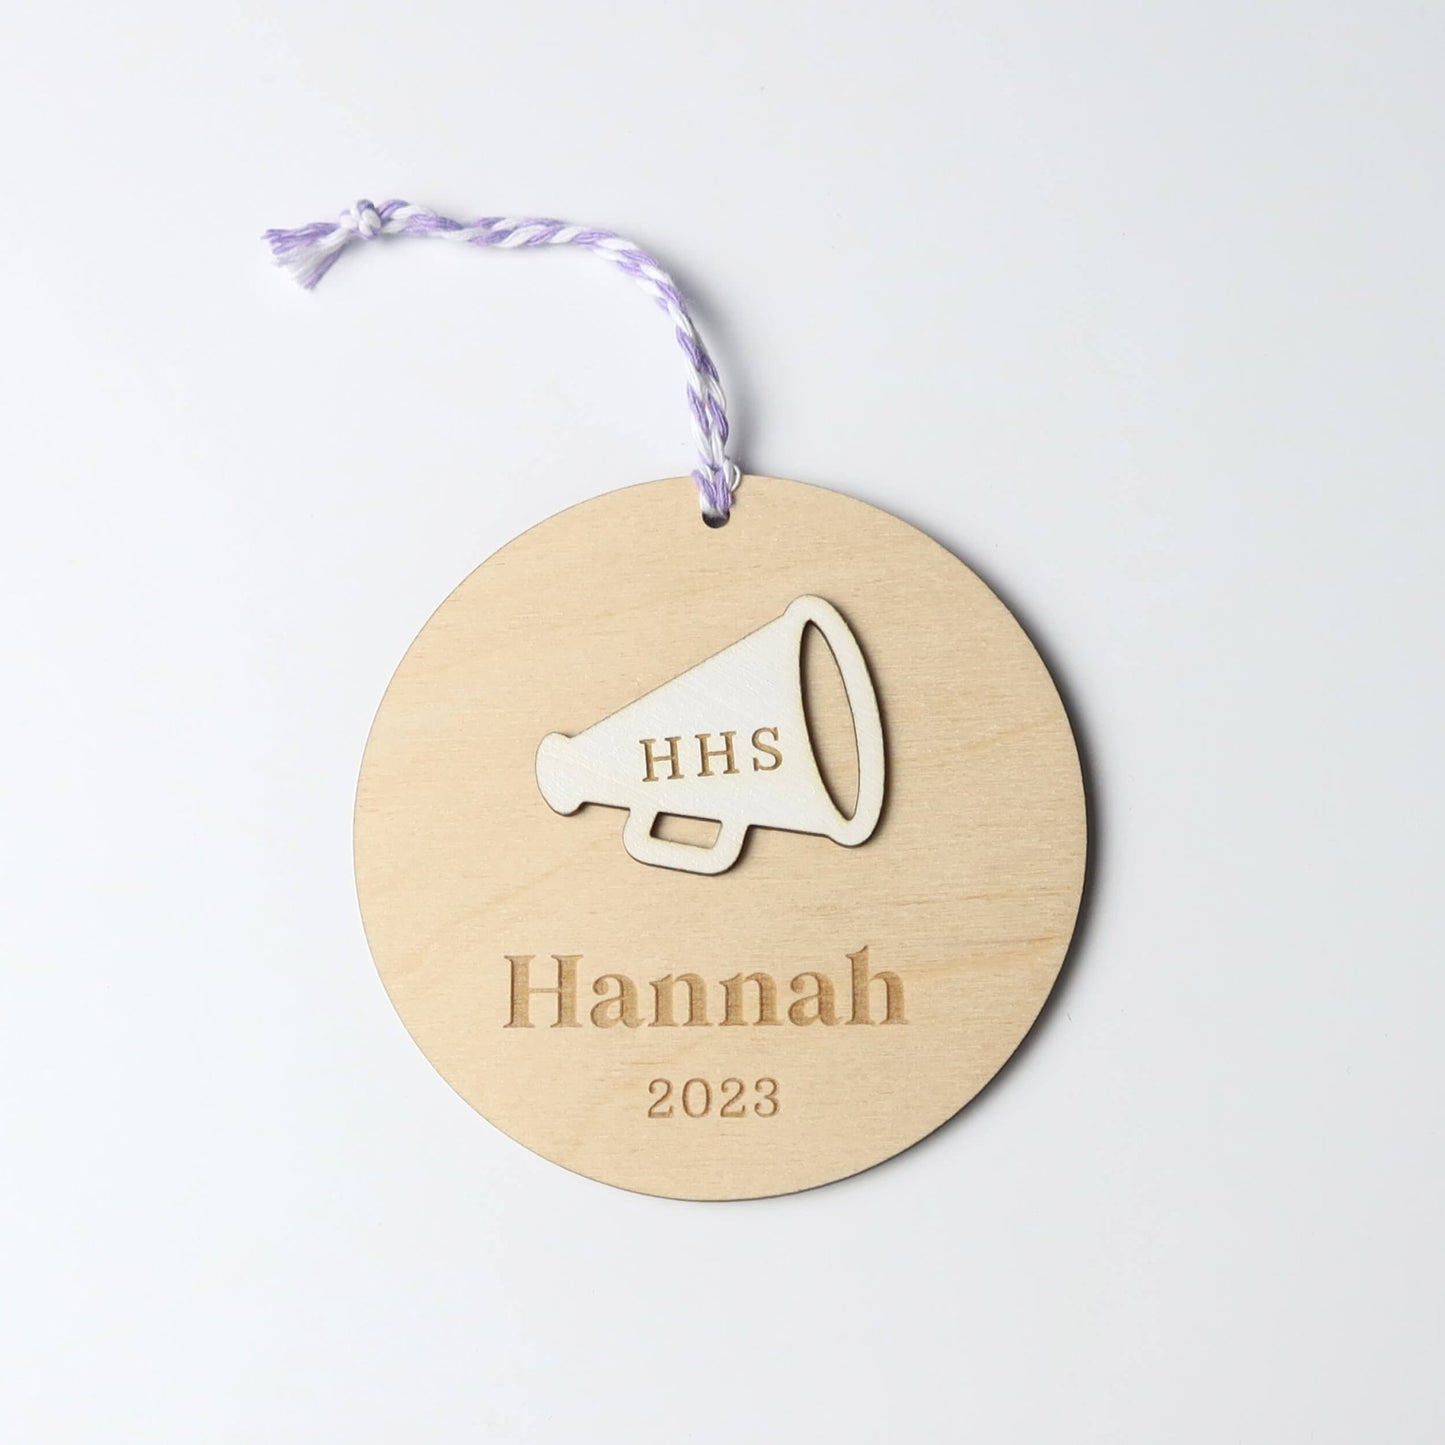 Personalized Cheerleader Ornament - Holiday Ornaments - Moon Rock Prints